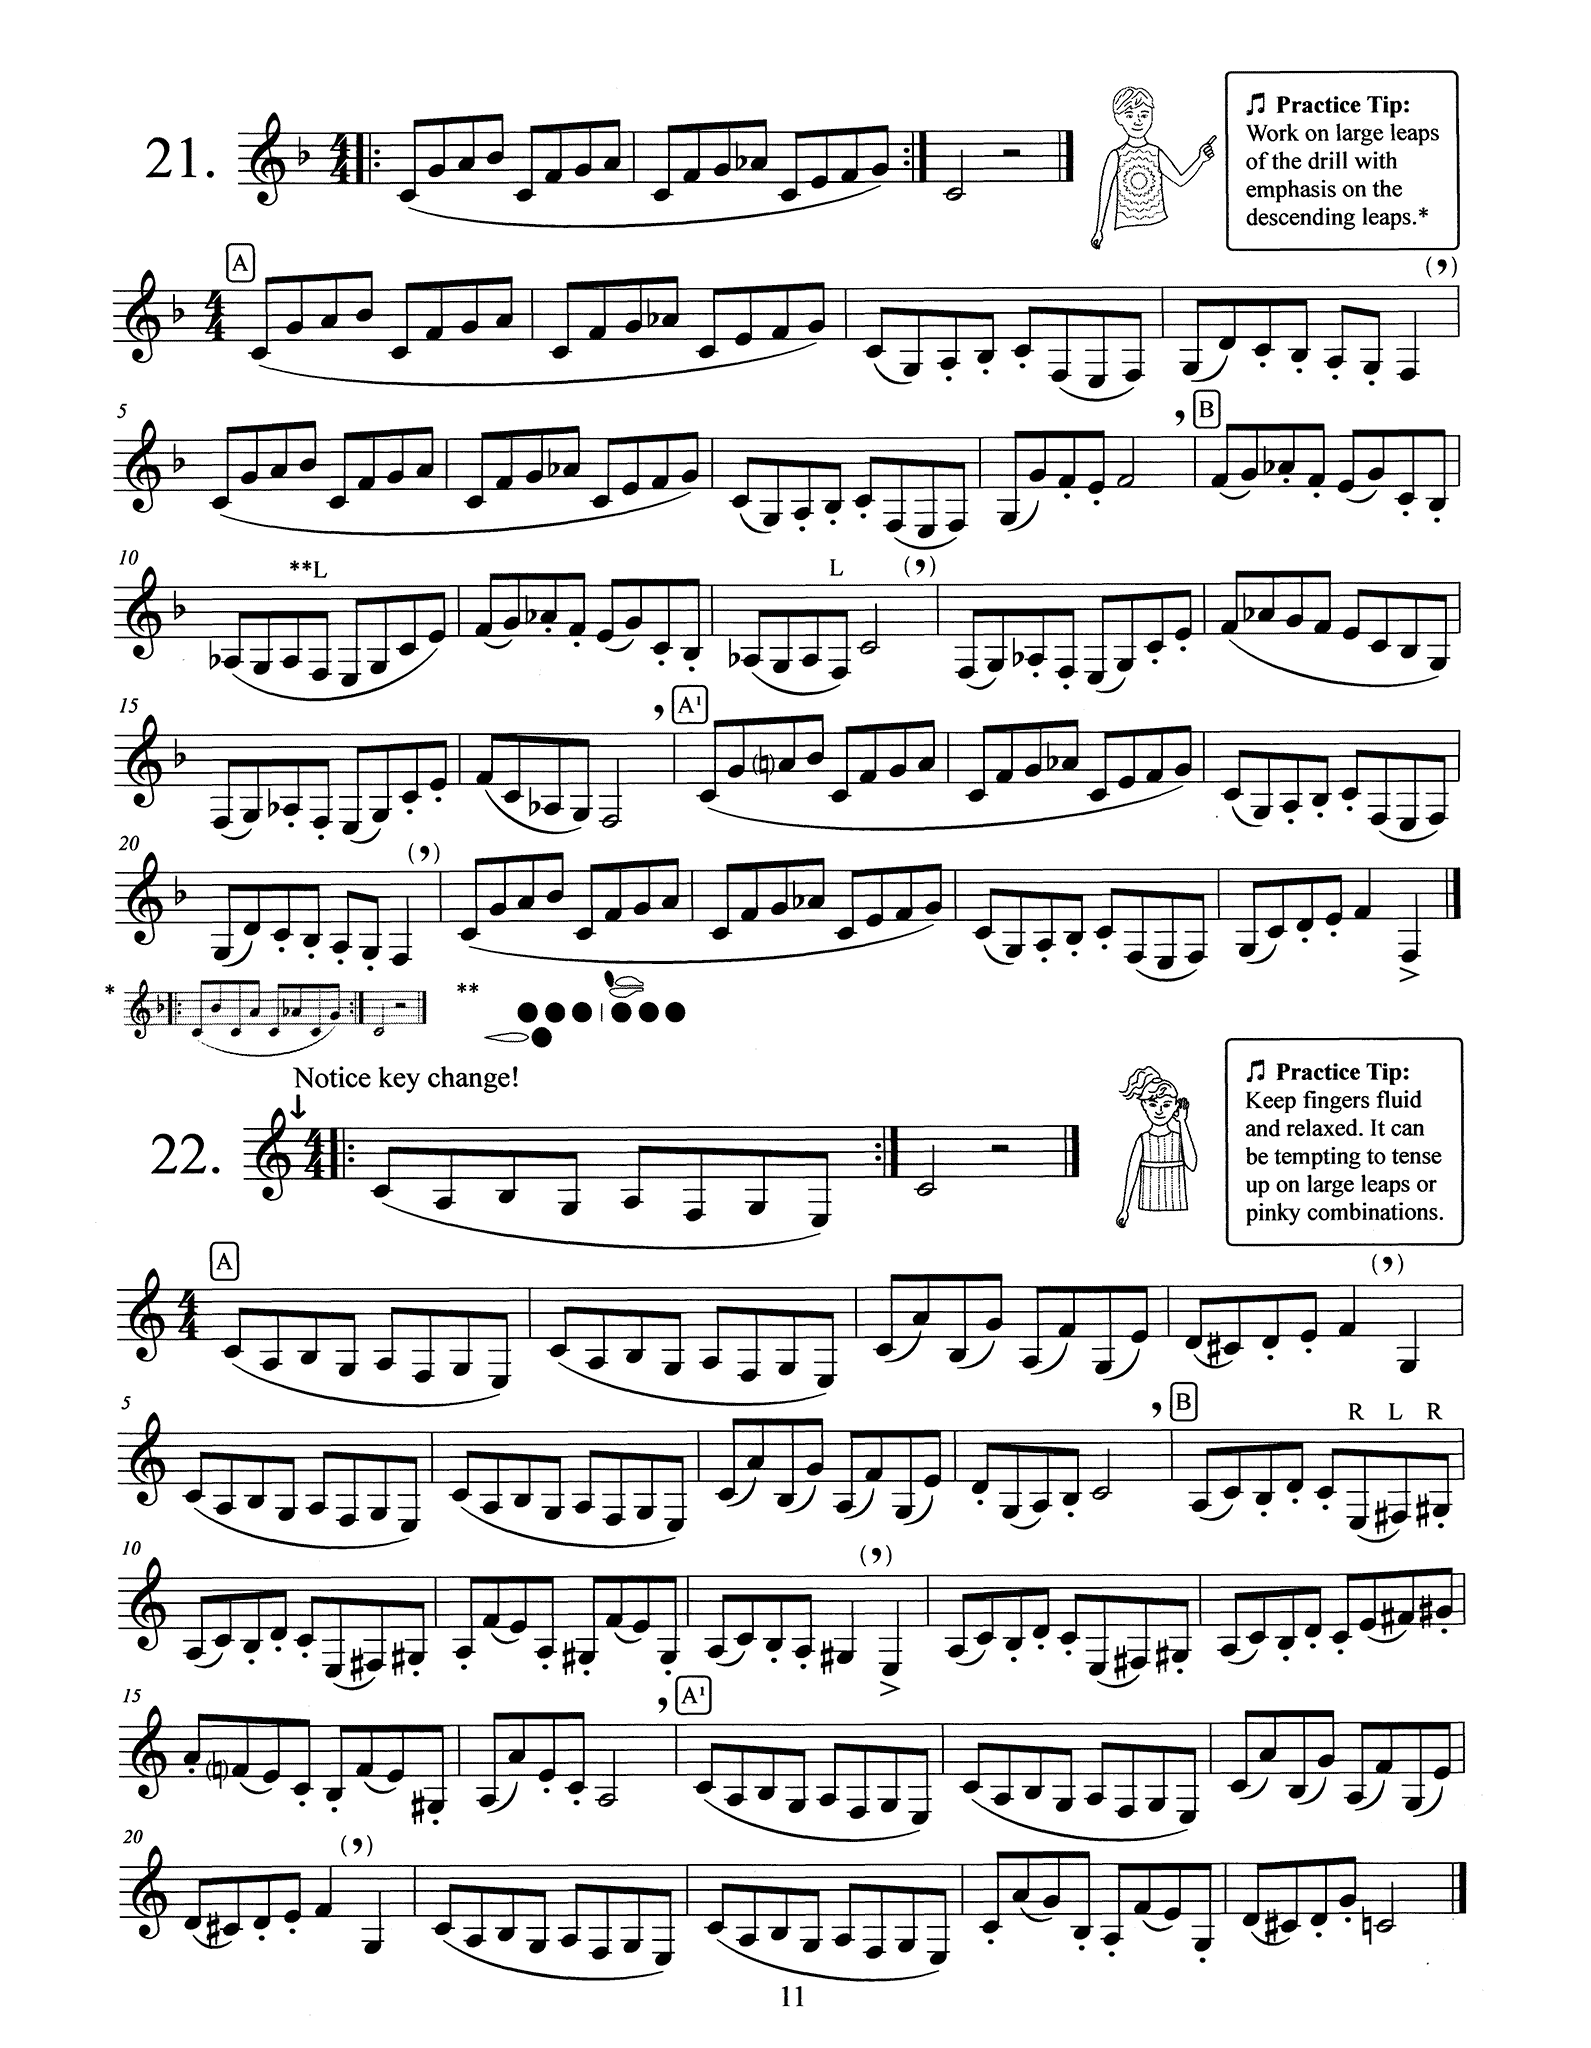 Denny-Chambers Finger Fitness Foundations clarinet etudes page 11